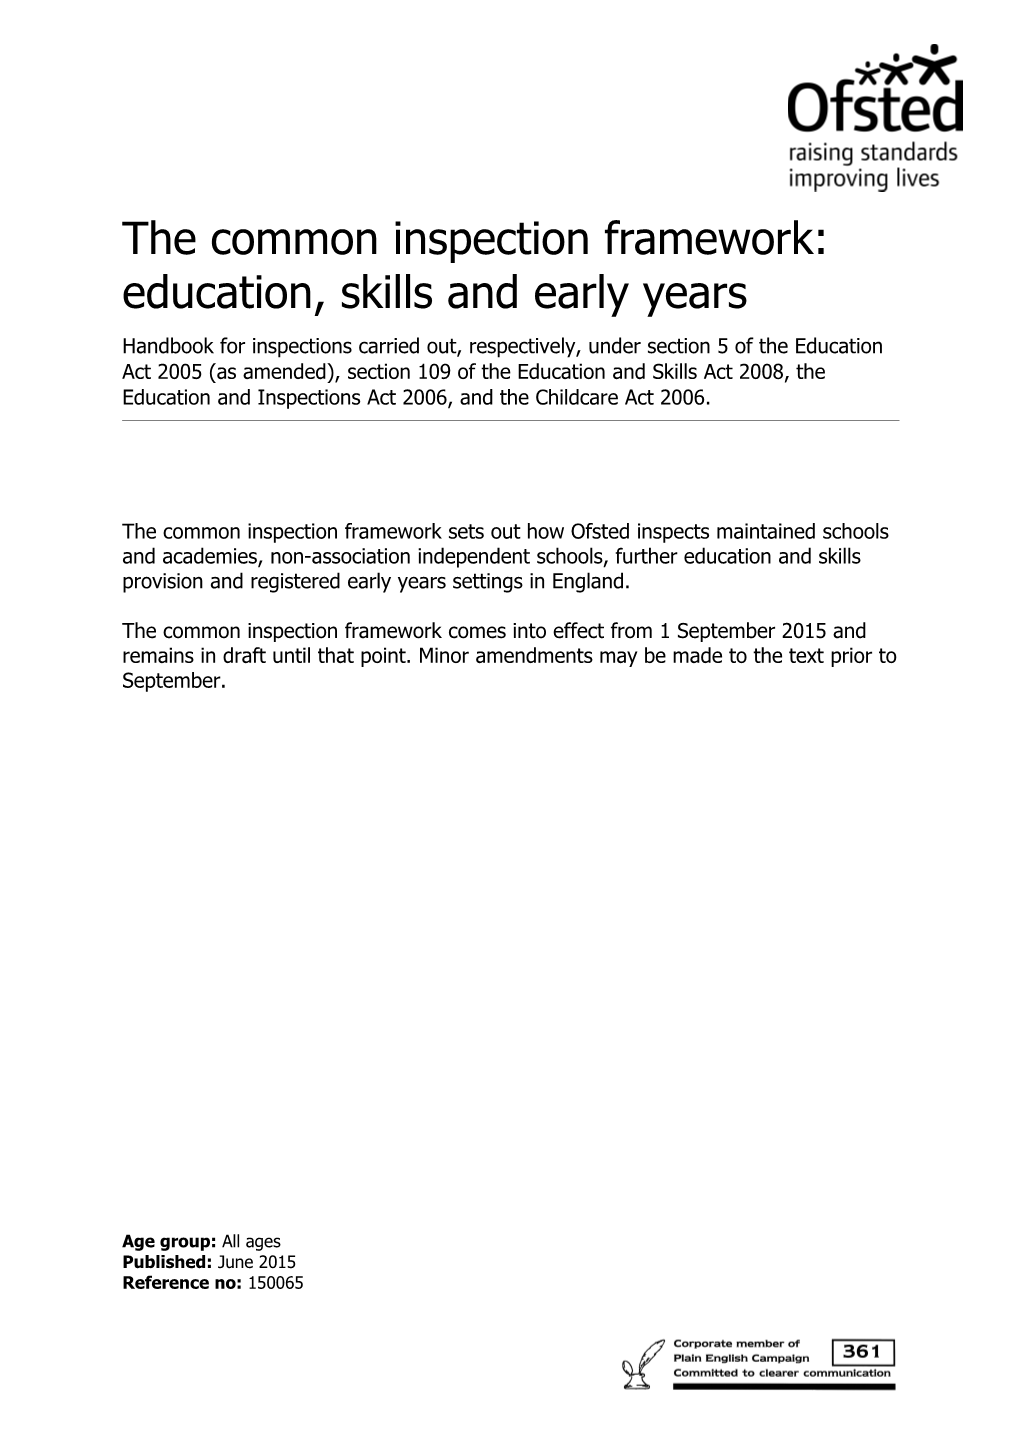 The Common Inspection Framework: Education, Skills and Early Years